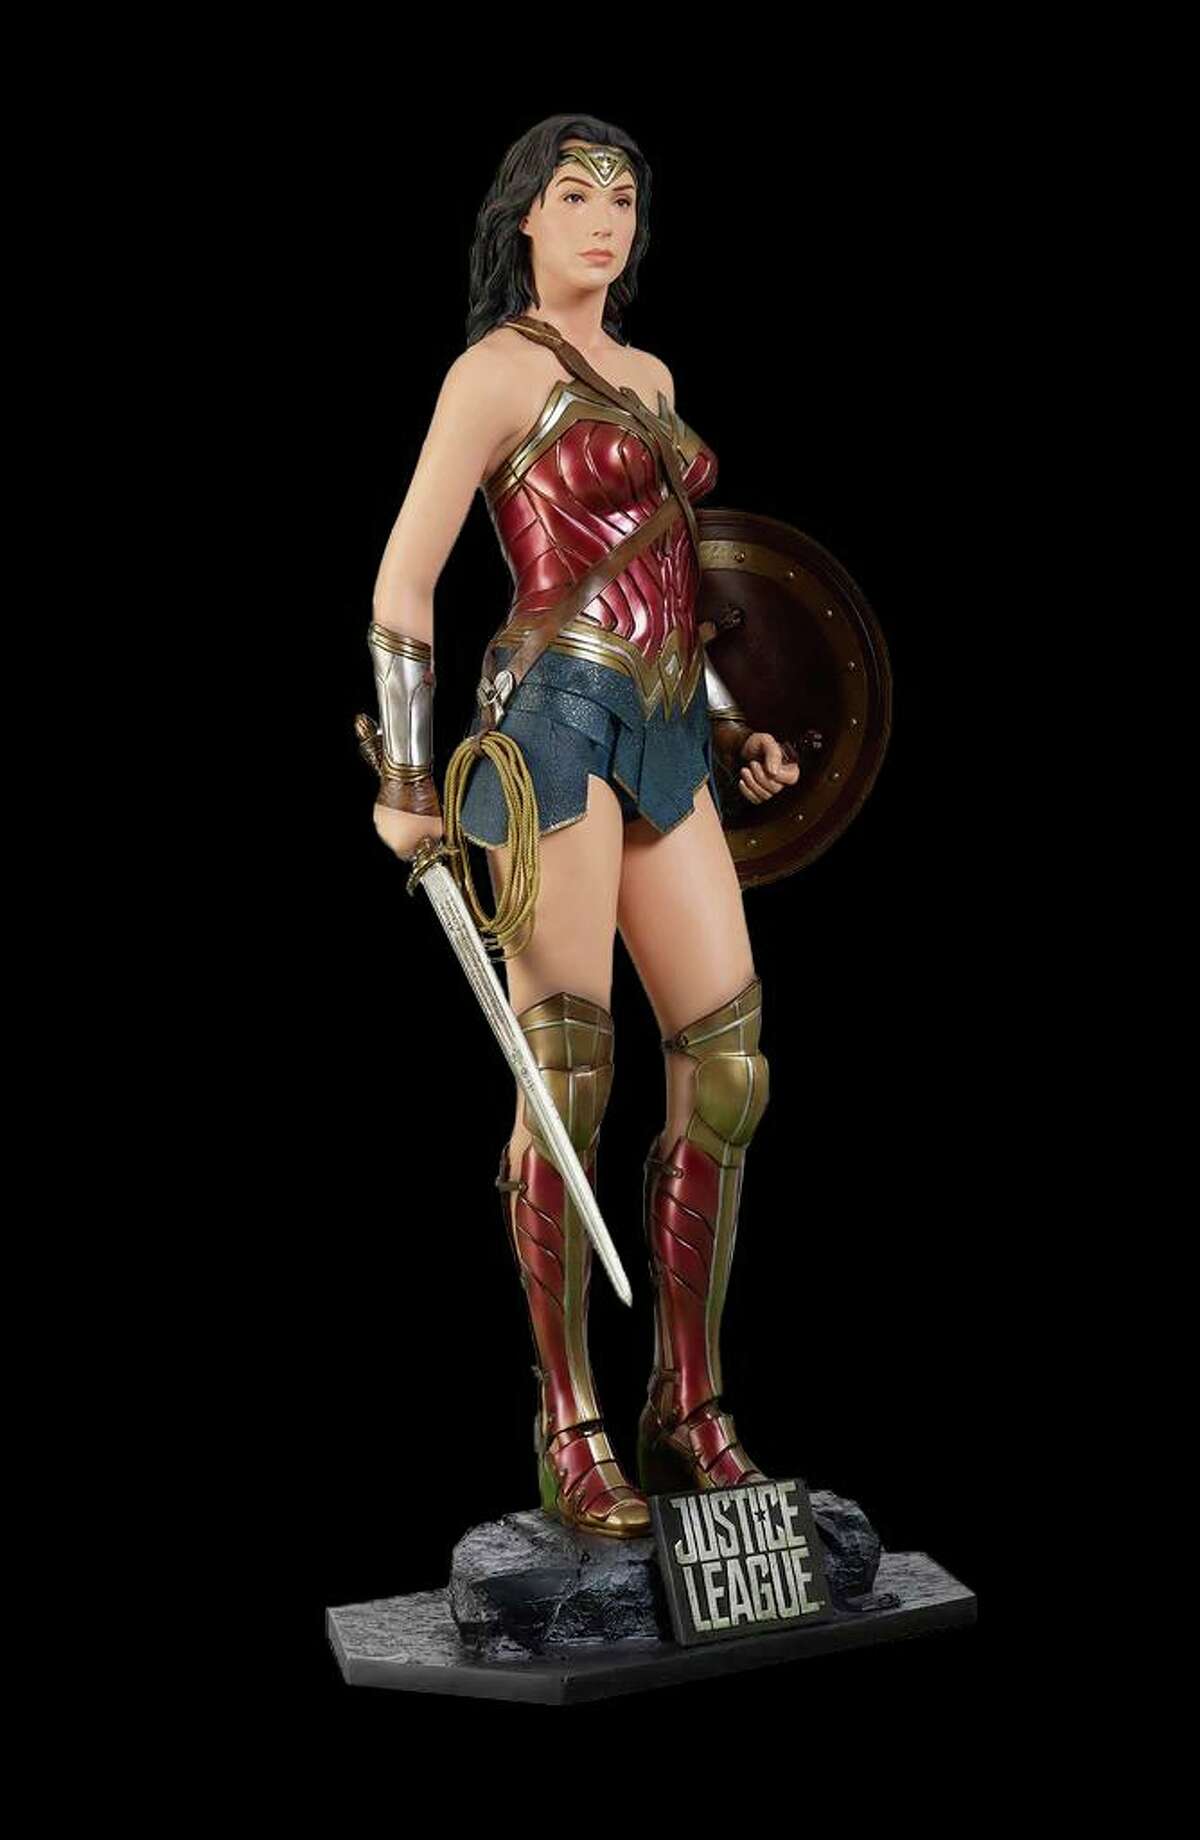 A statue of Wonder Woman will be part of the exhibit 